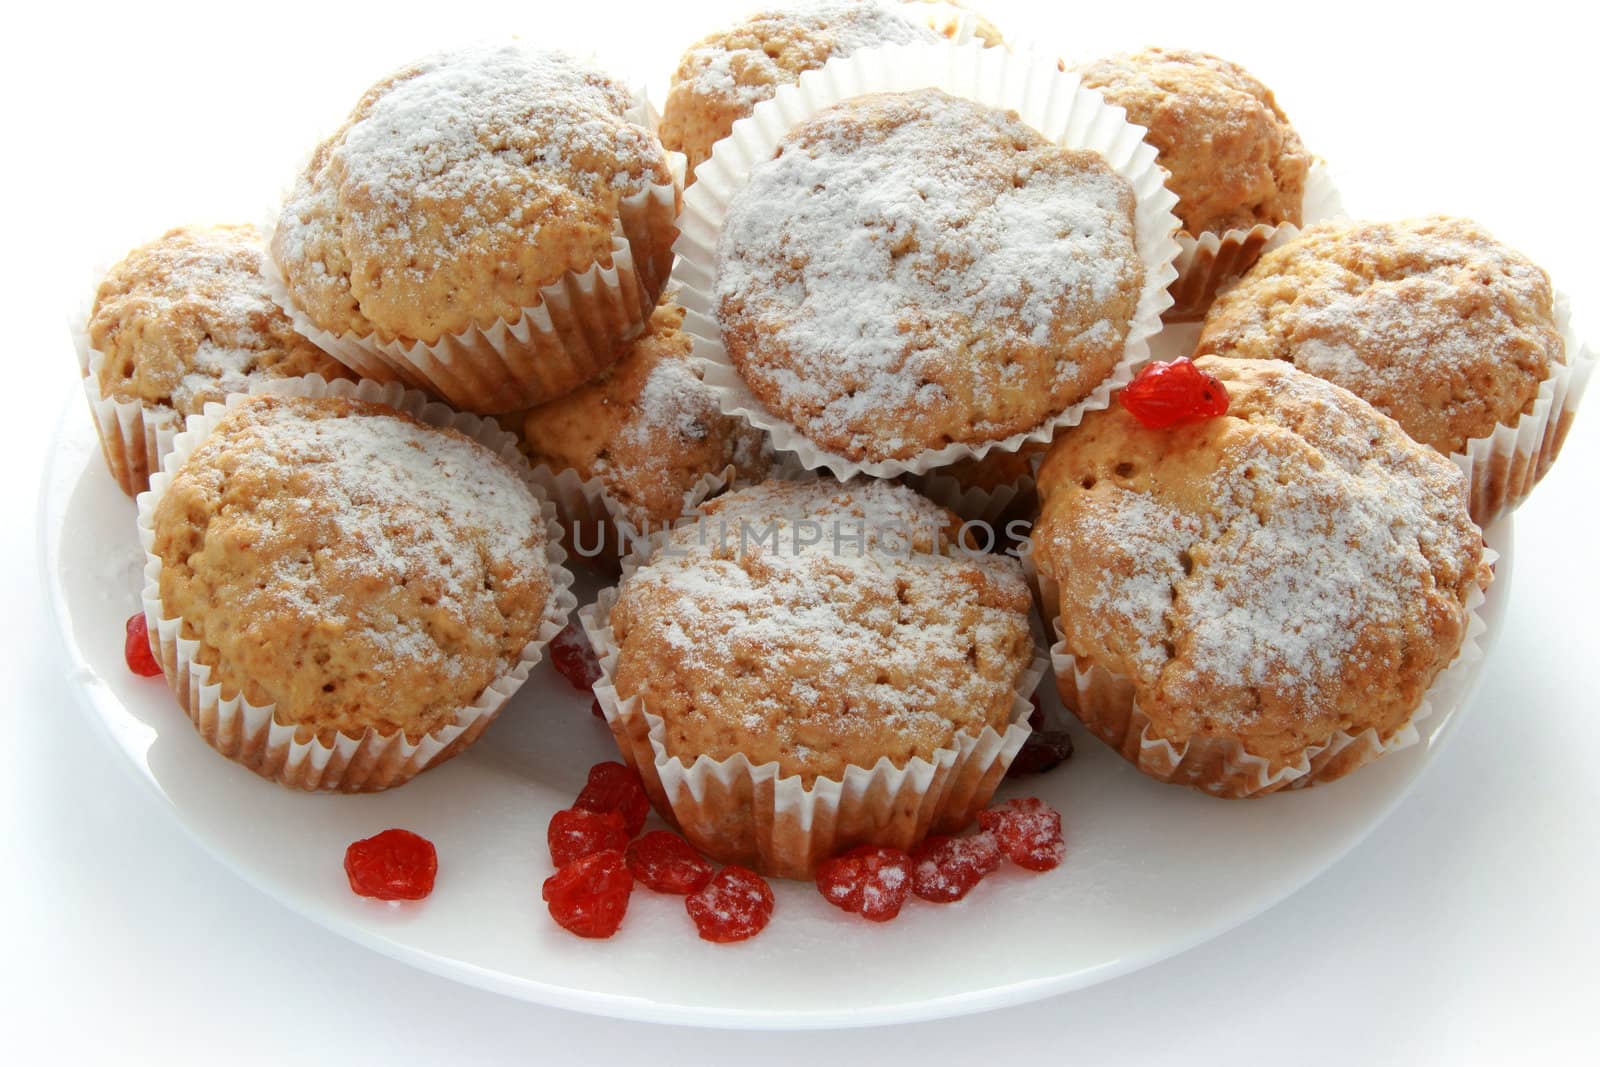 muffins on plate